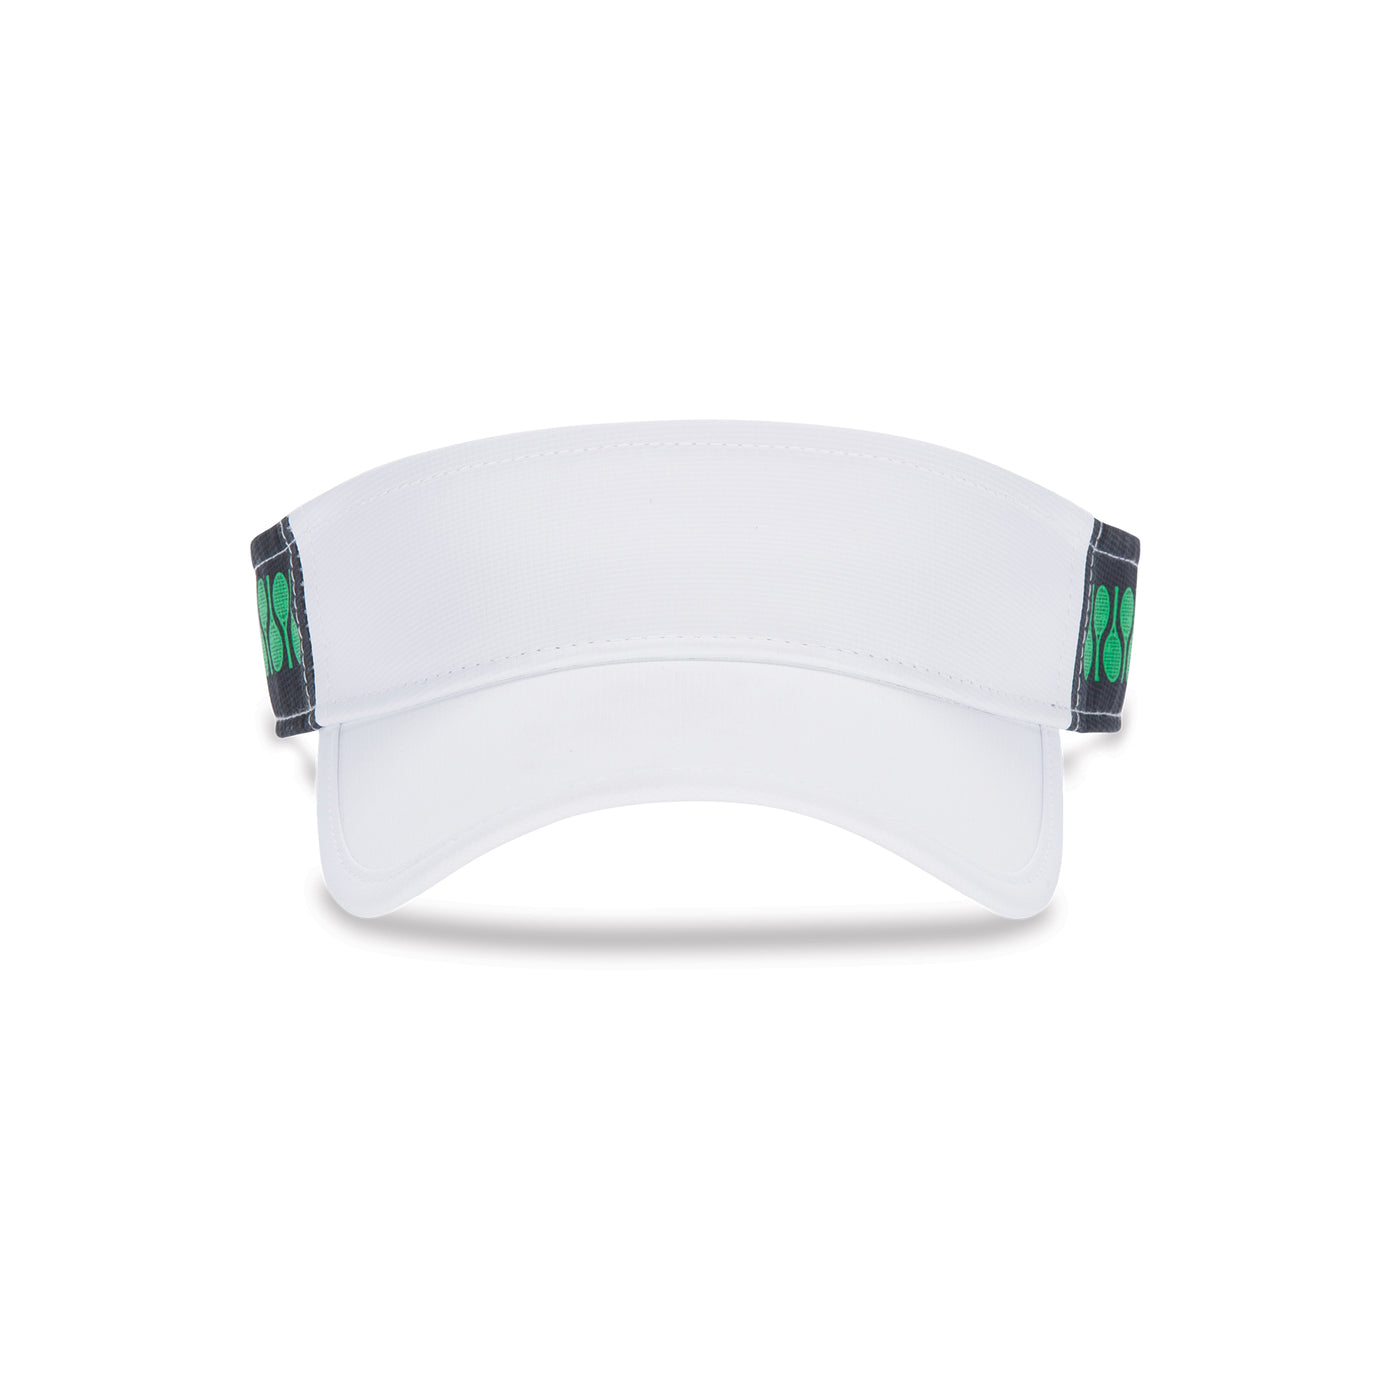 Front view of Racquets Head in the game visor. Front of visor is white and the sides are navy with green racquets printed on the navy.